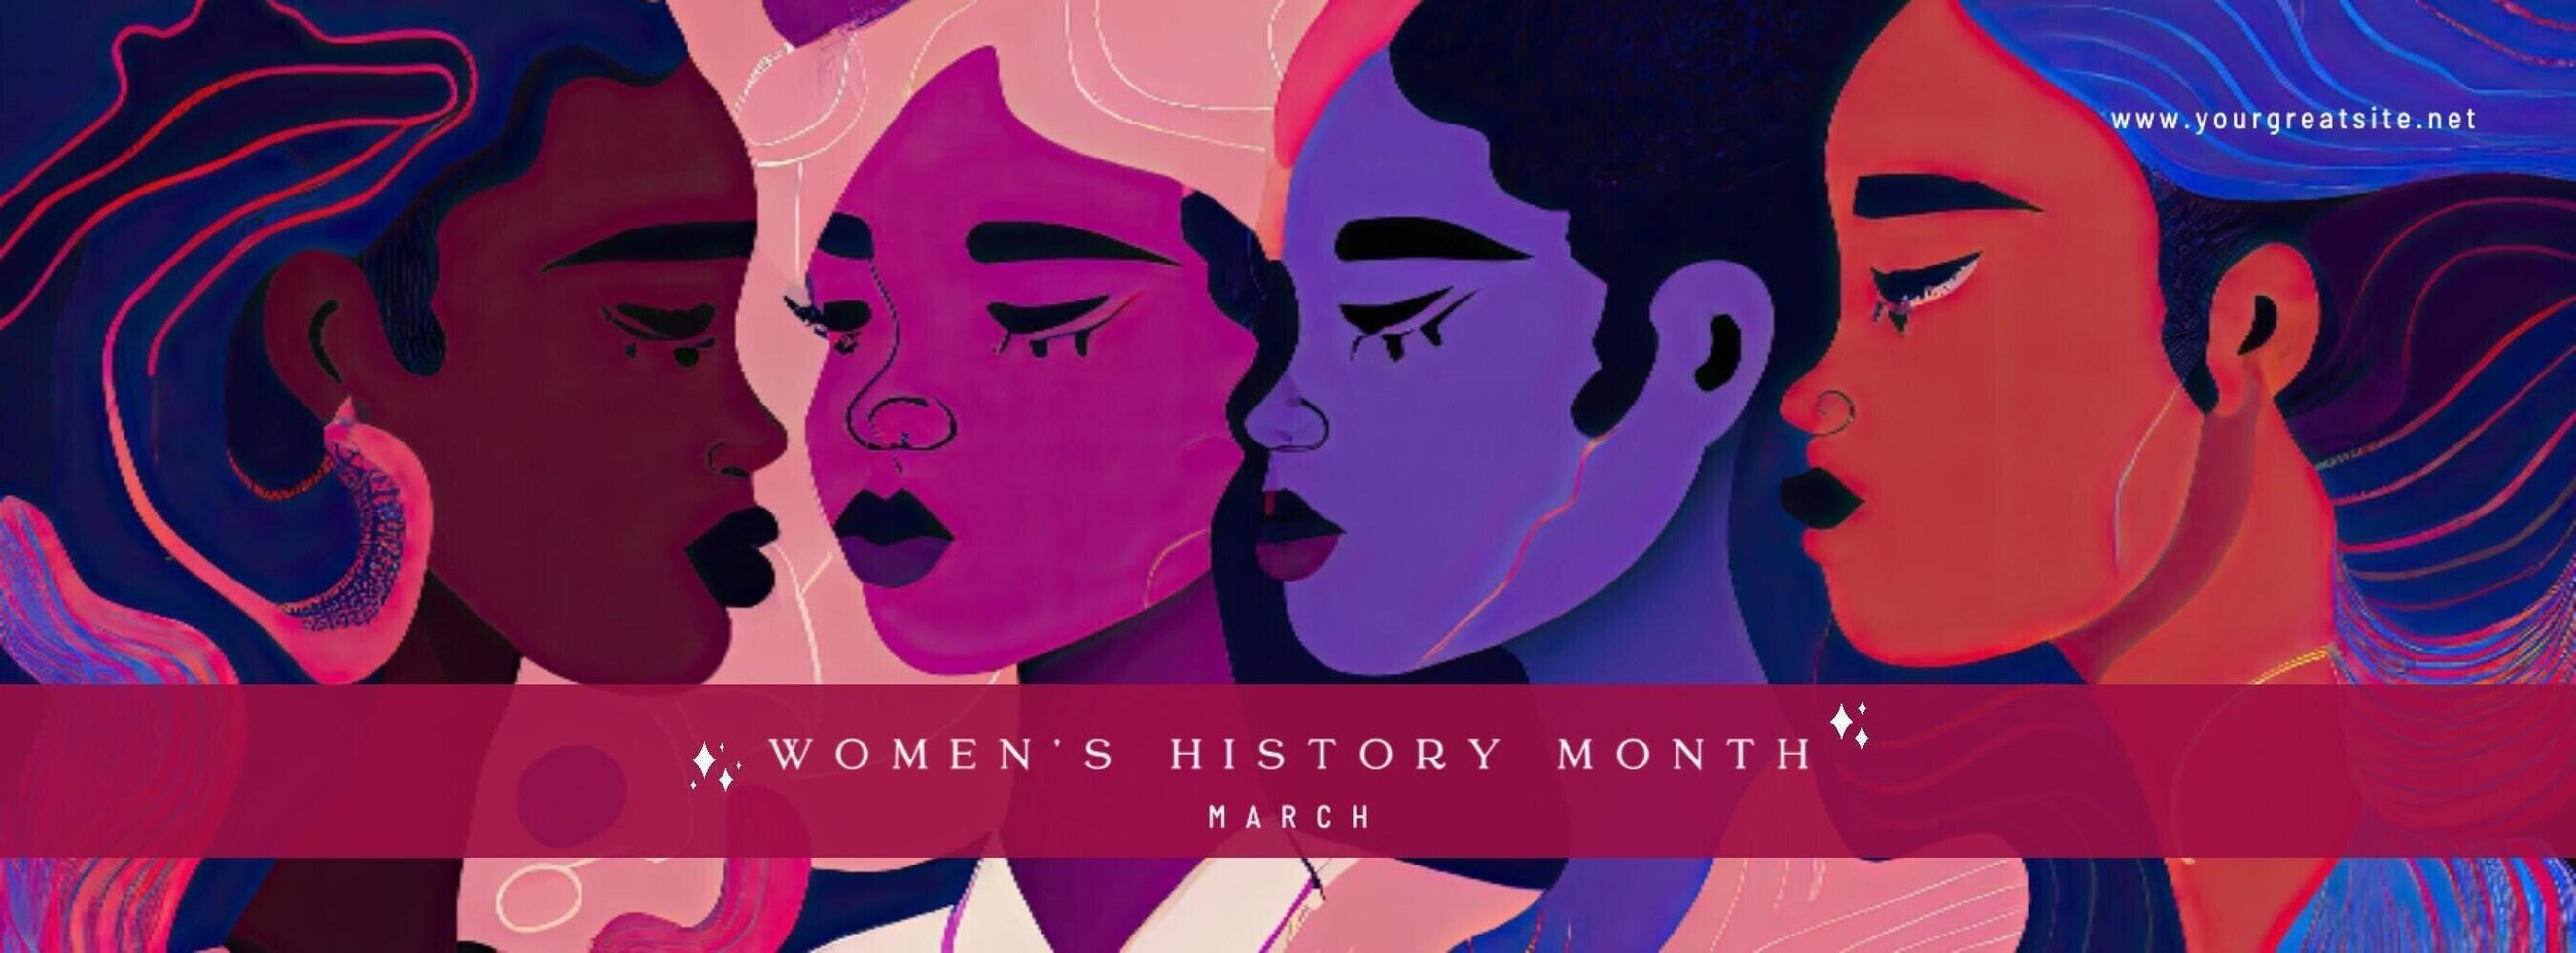 Colourful Doodle Illustration Women's History Month Facebook Cover template